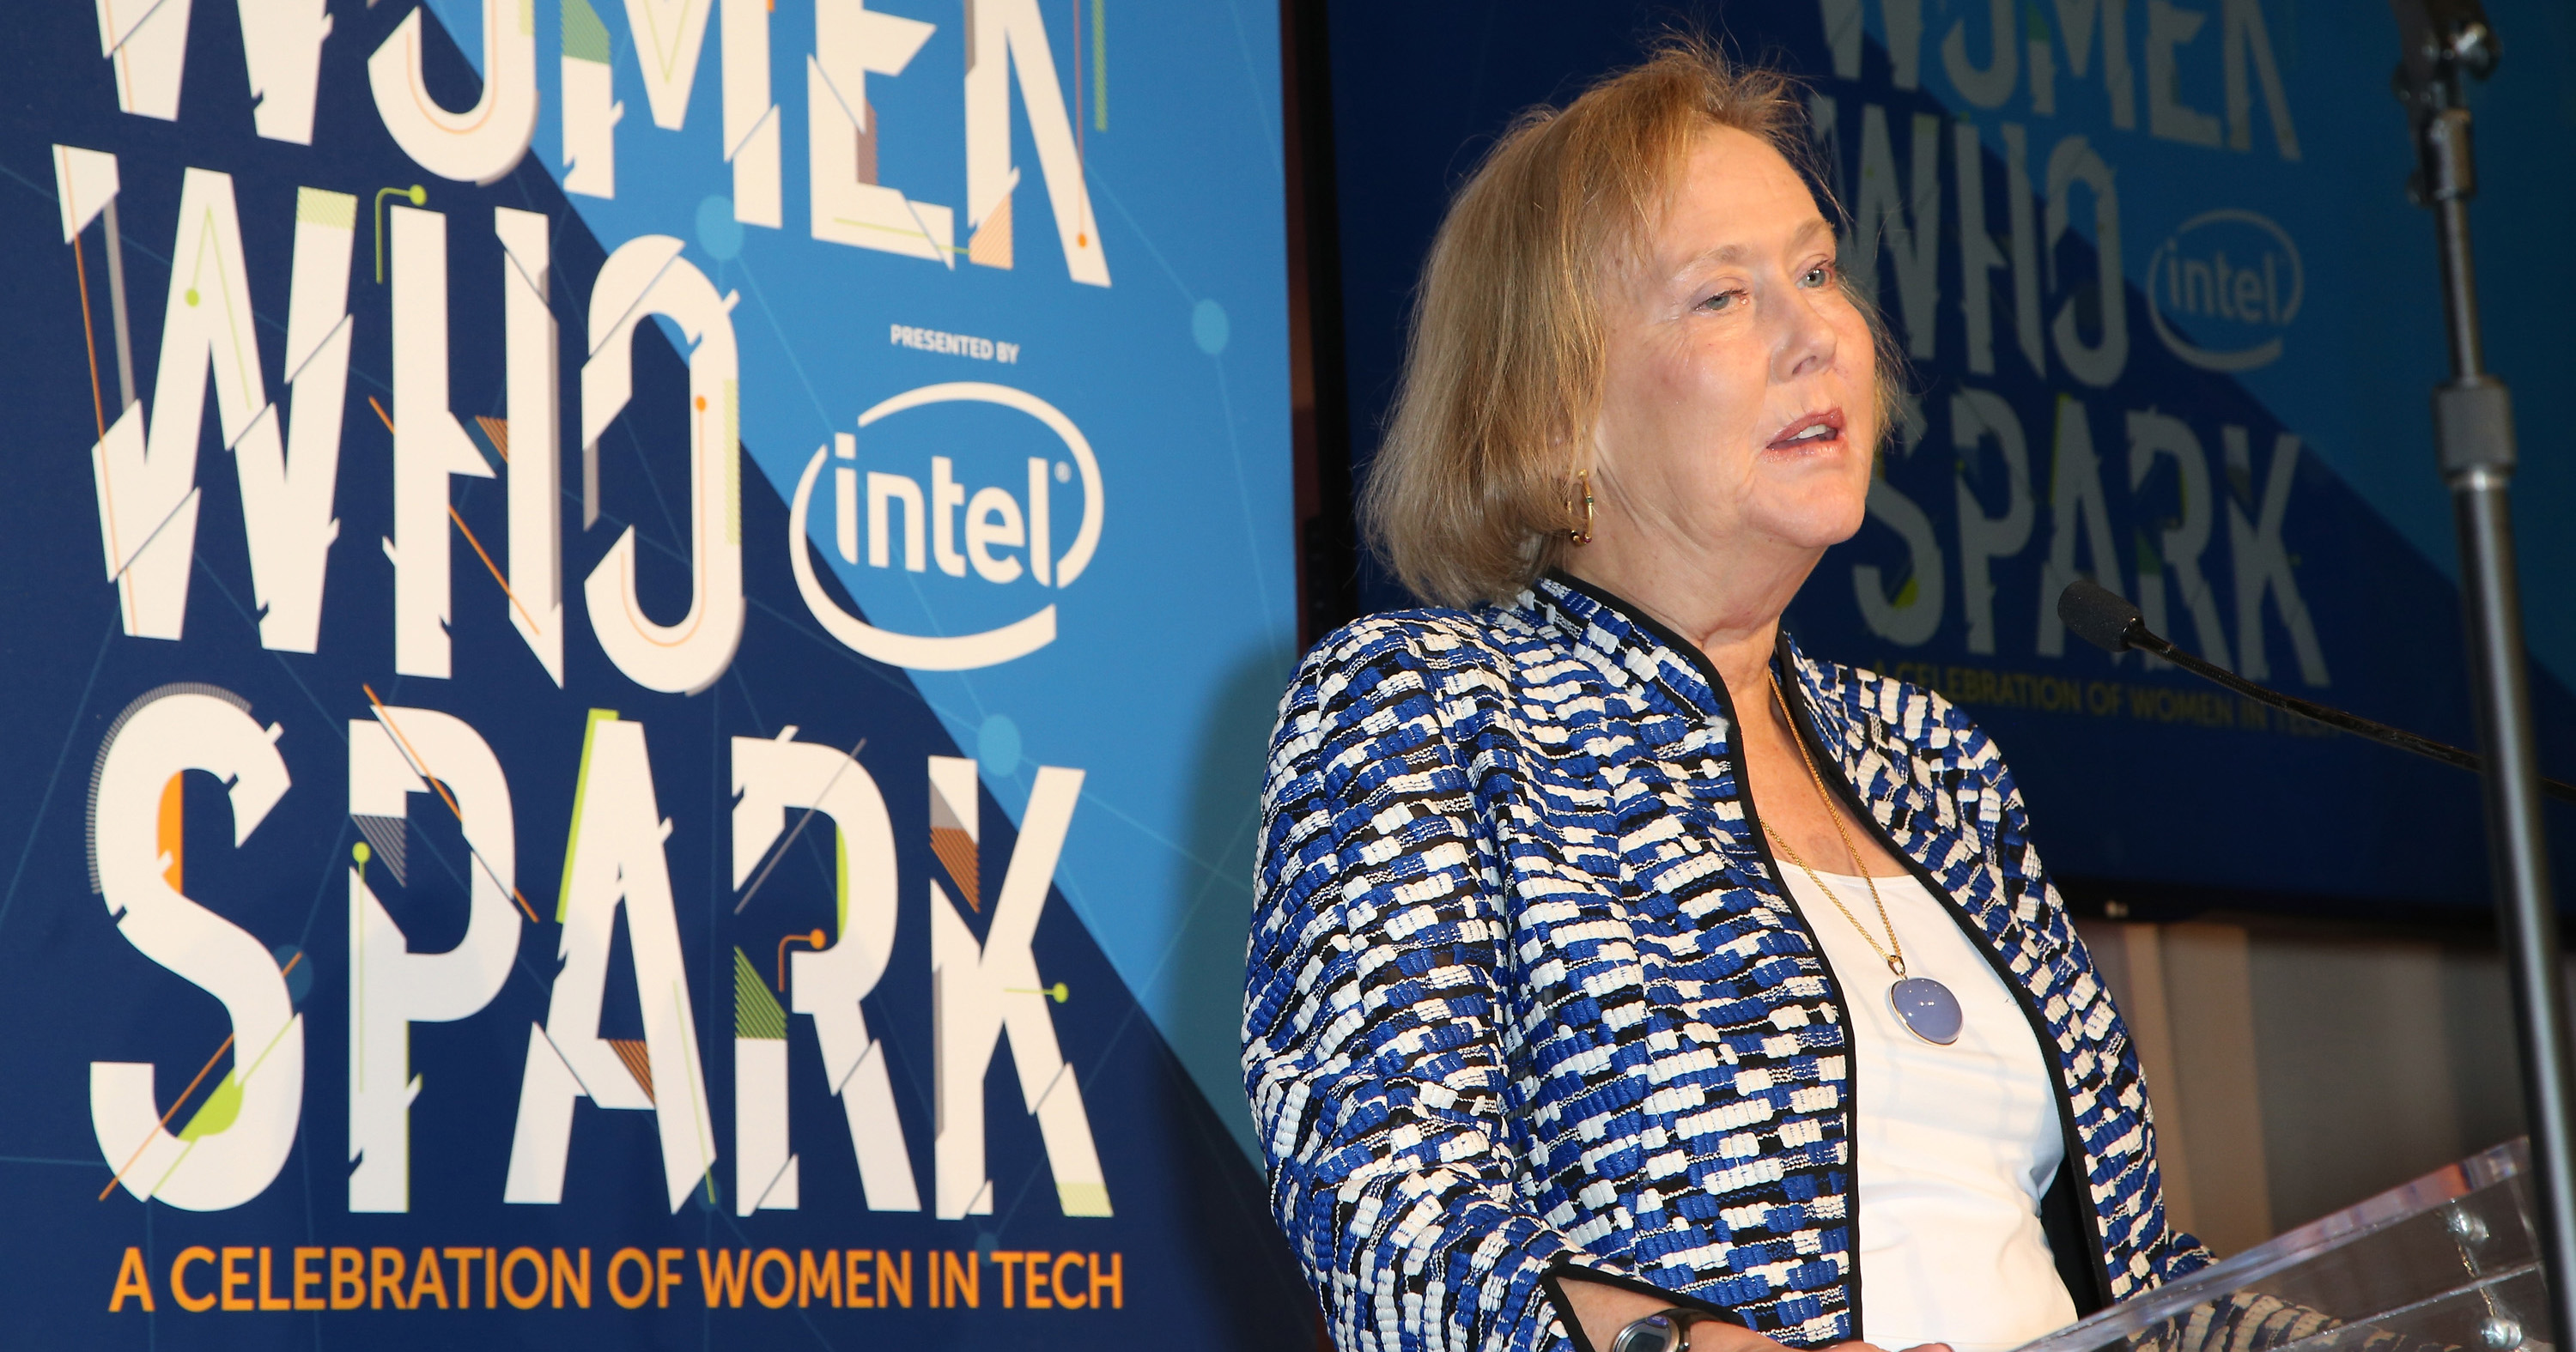 Honoree Dr. Telle Whitney speaks during the Women Who Spark Awards presented by Intel on Jan. 7, 2016 in Las Vegas.